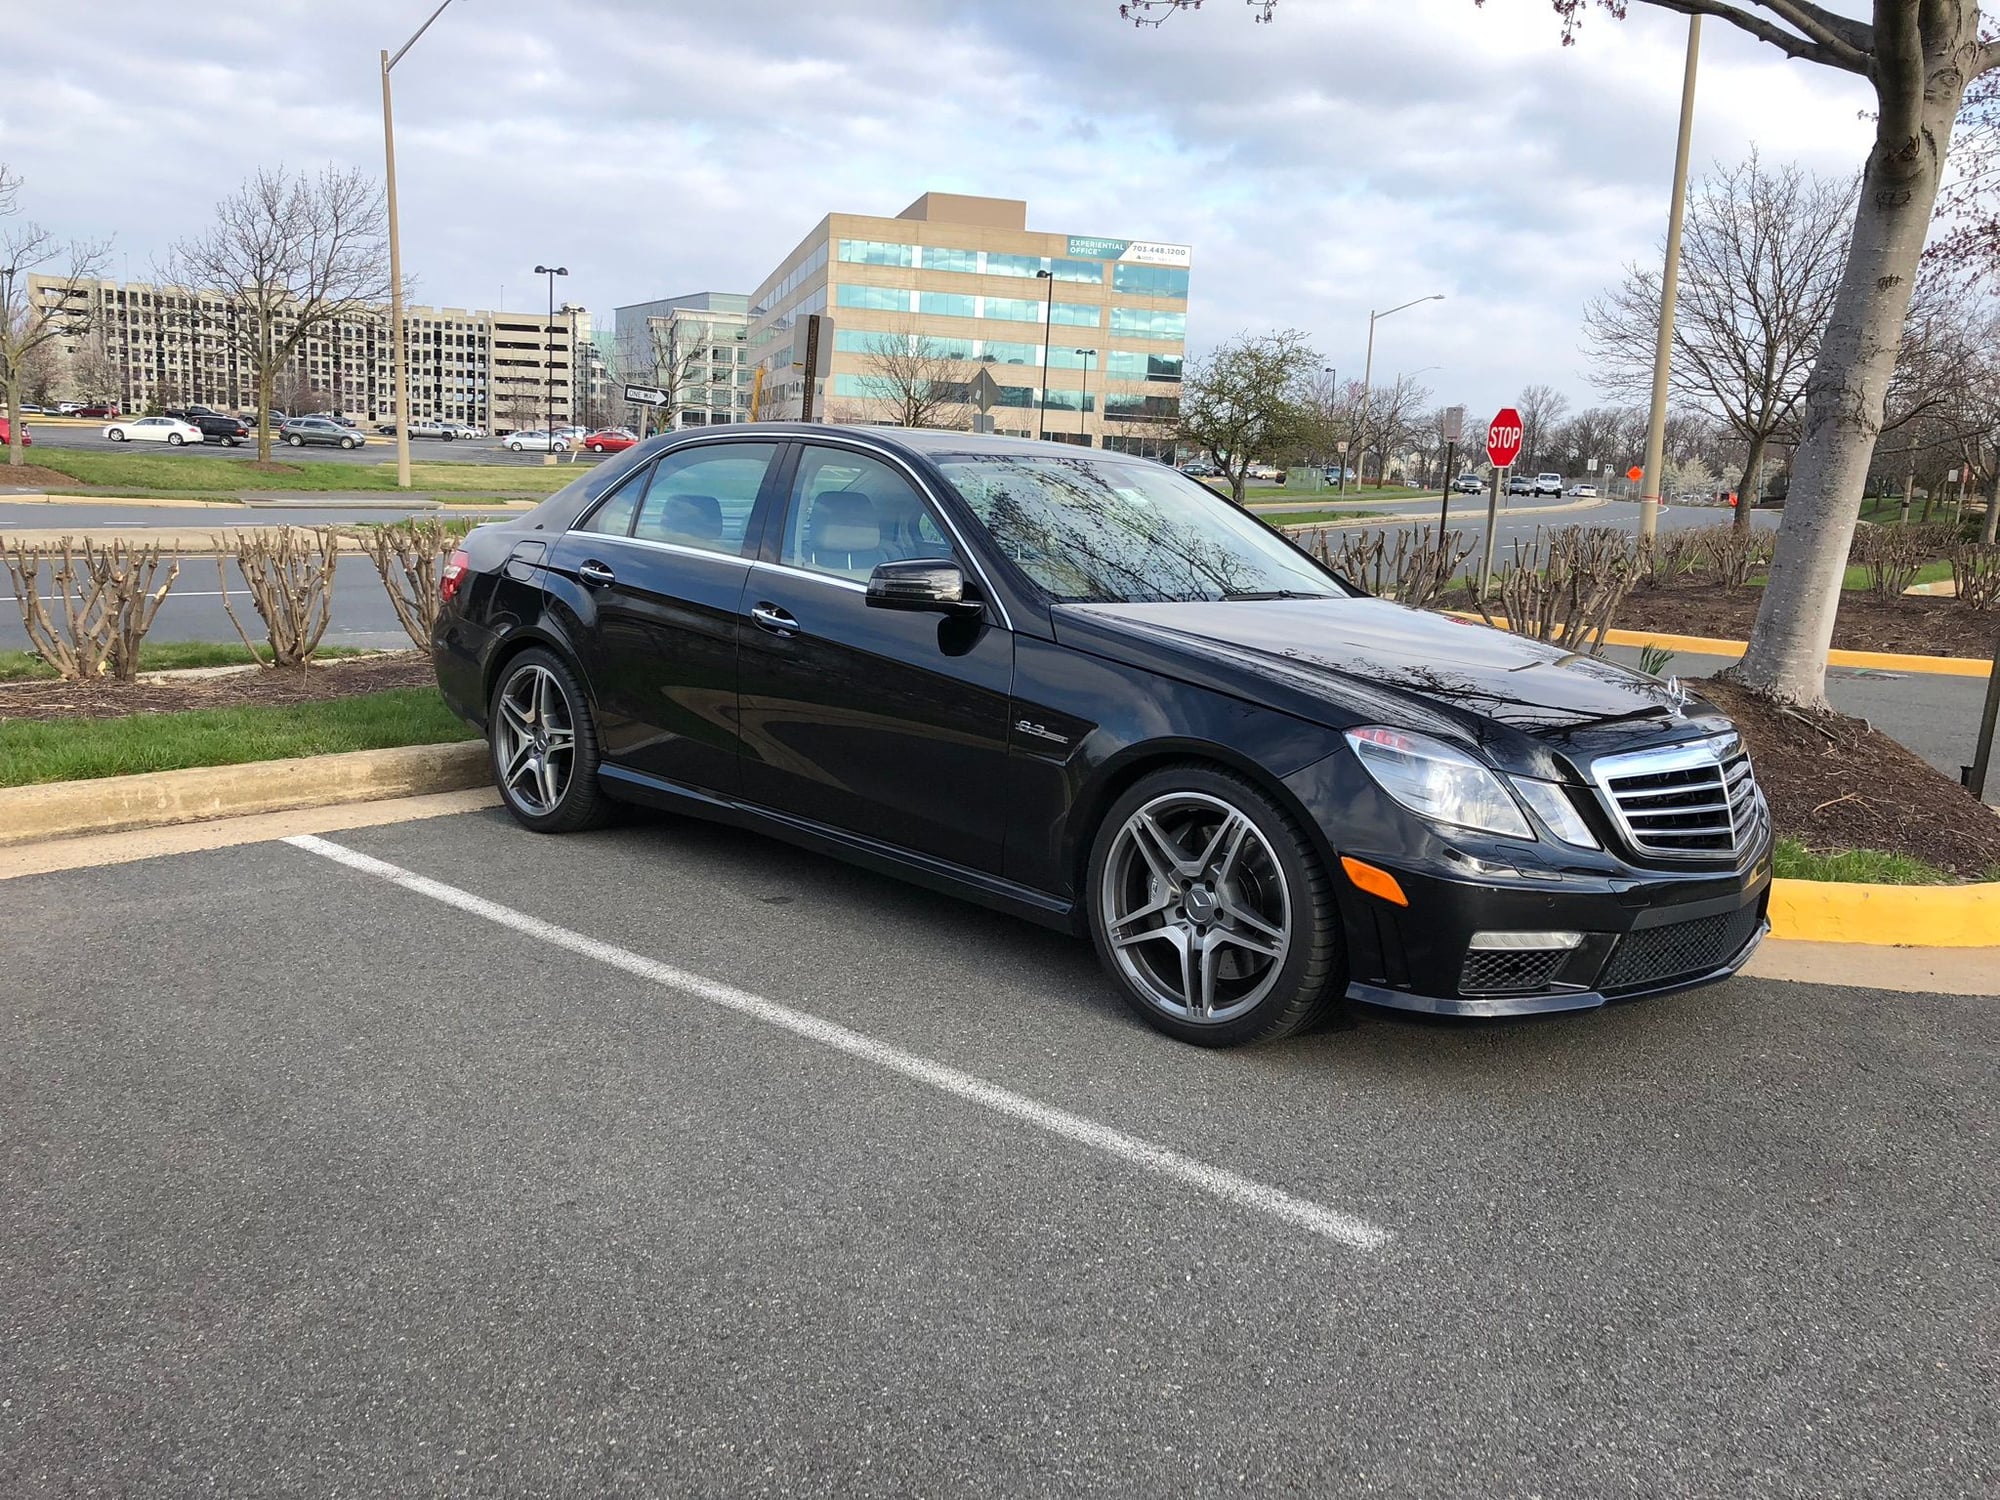 2010 Mercedes-Benz E63 AMG - 2010 E63 - adult owned, responsibly driven - Used - VIN WDDHF7HB0AA120219 - 90,000 Miles - 8 cyl - 2WD - Automatic - Sedan - Black - Churchville, MD 21028, United States